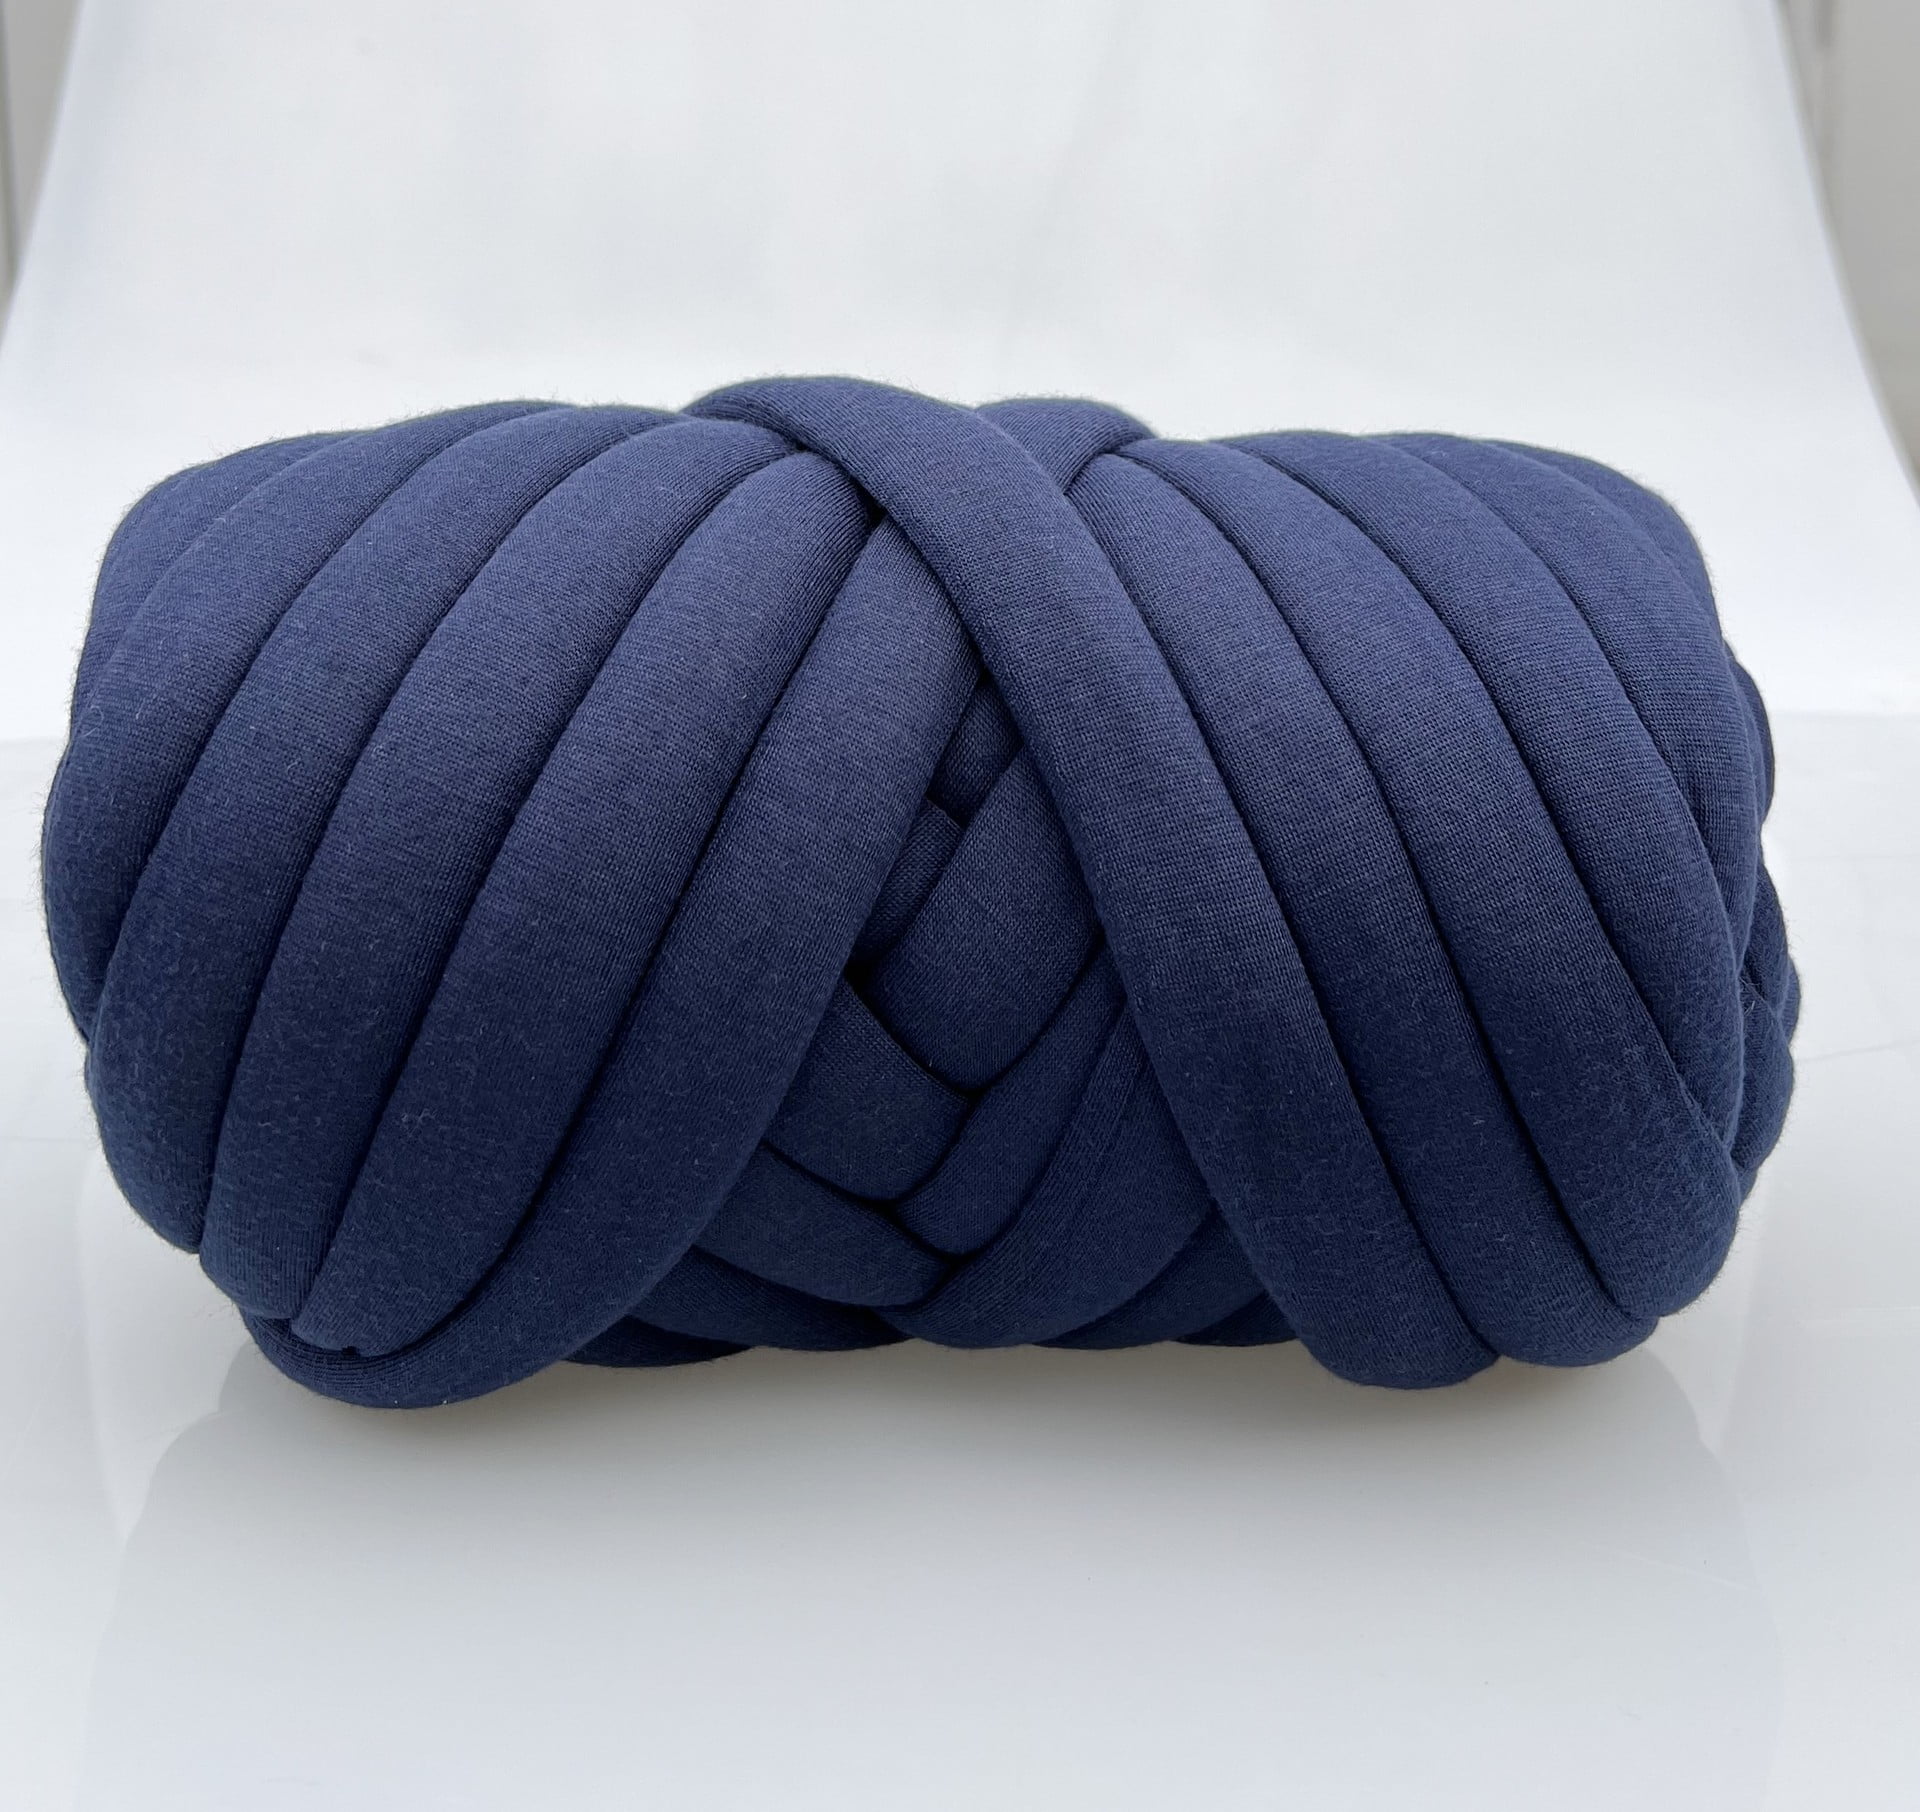 Chunky Wool Yarn Super Soft Tube Bulky Giant Yarn Thick 55 Yards for Arm Knitting Roving Pet Bed and Bed Fence Braided Knot DIY Crocheting Navy Blue